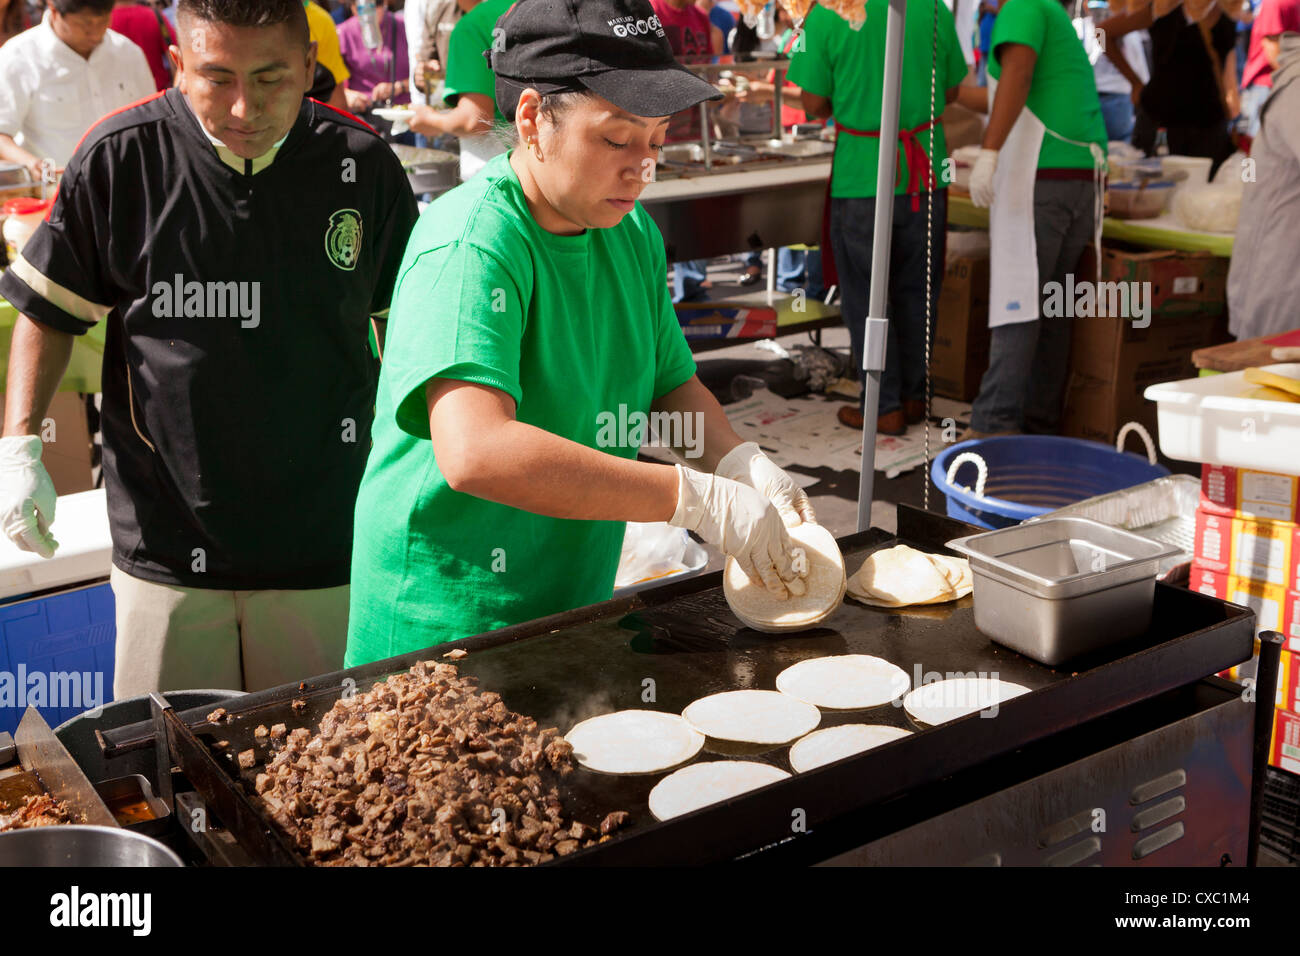 A woman grilling tortillas at an outdoor festival Stock Photo